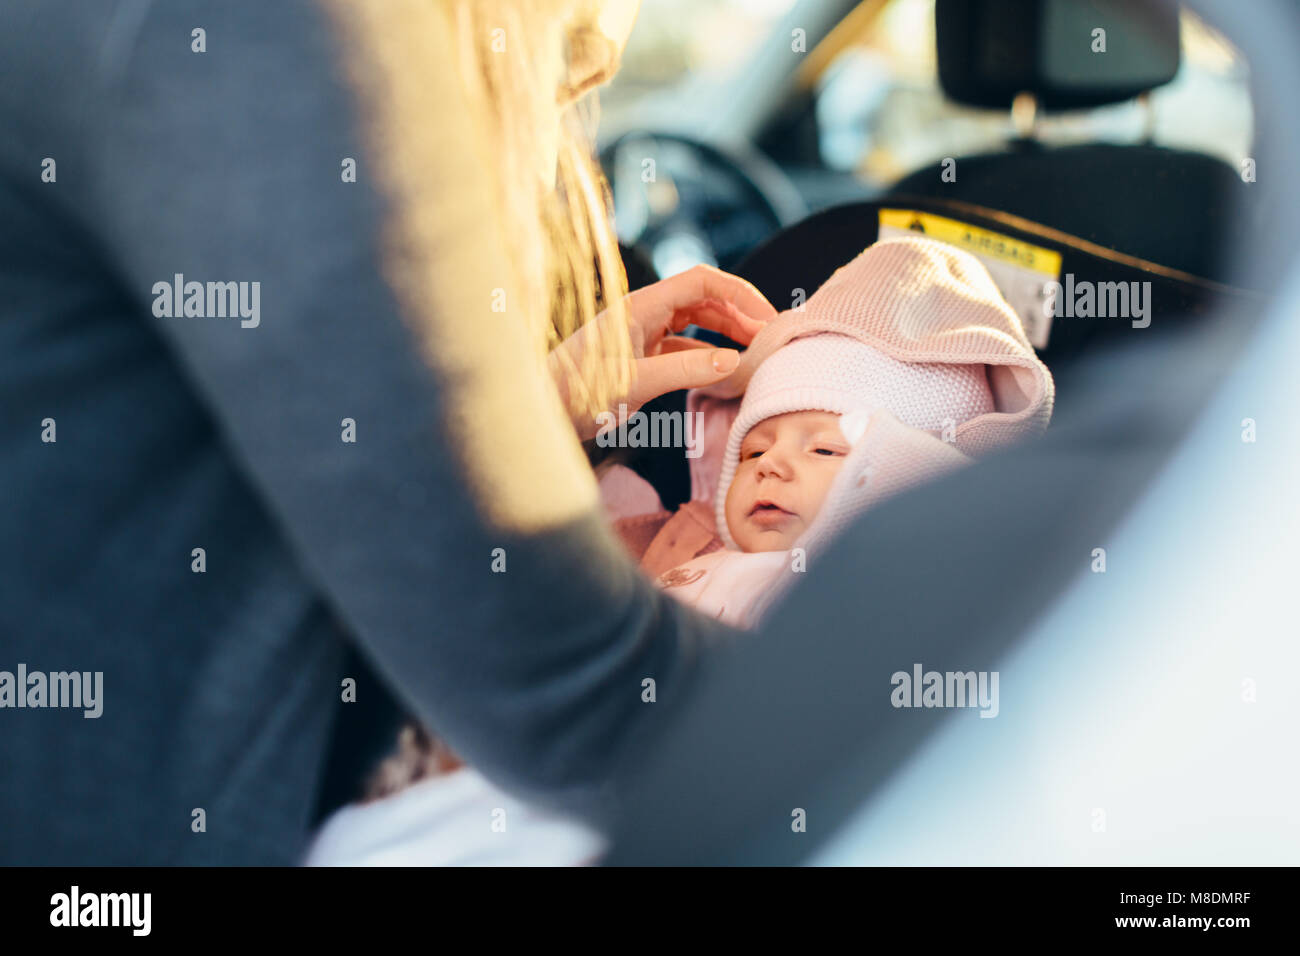 Mother fastening young baby in car seat, mid section Stock Photo